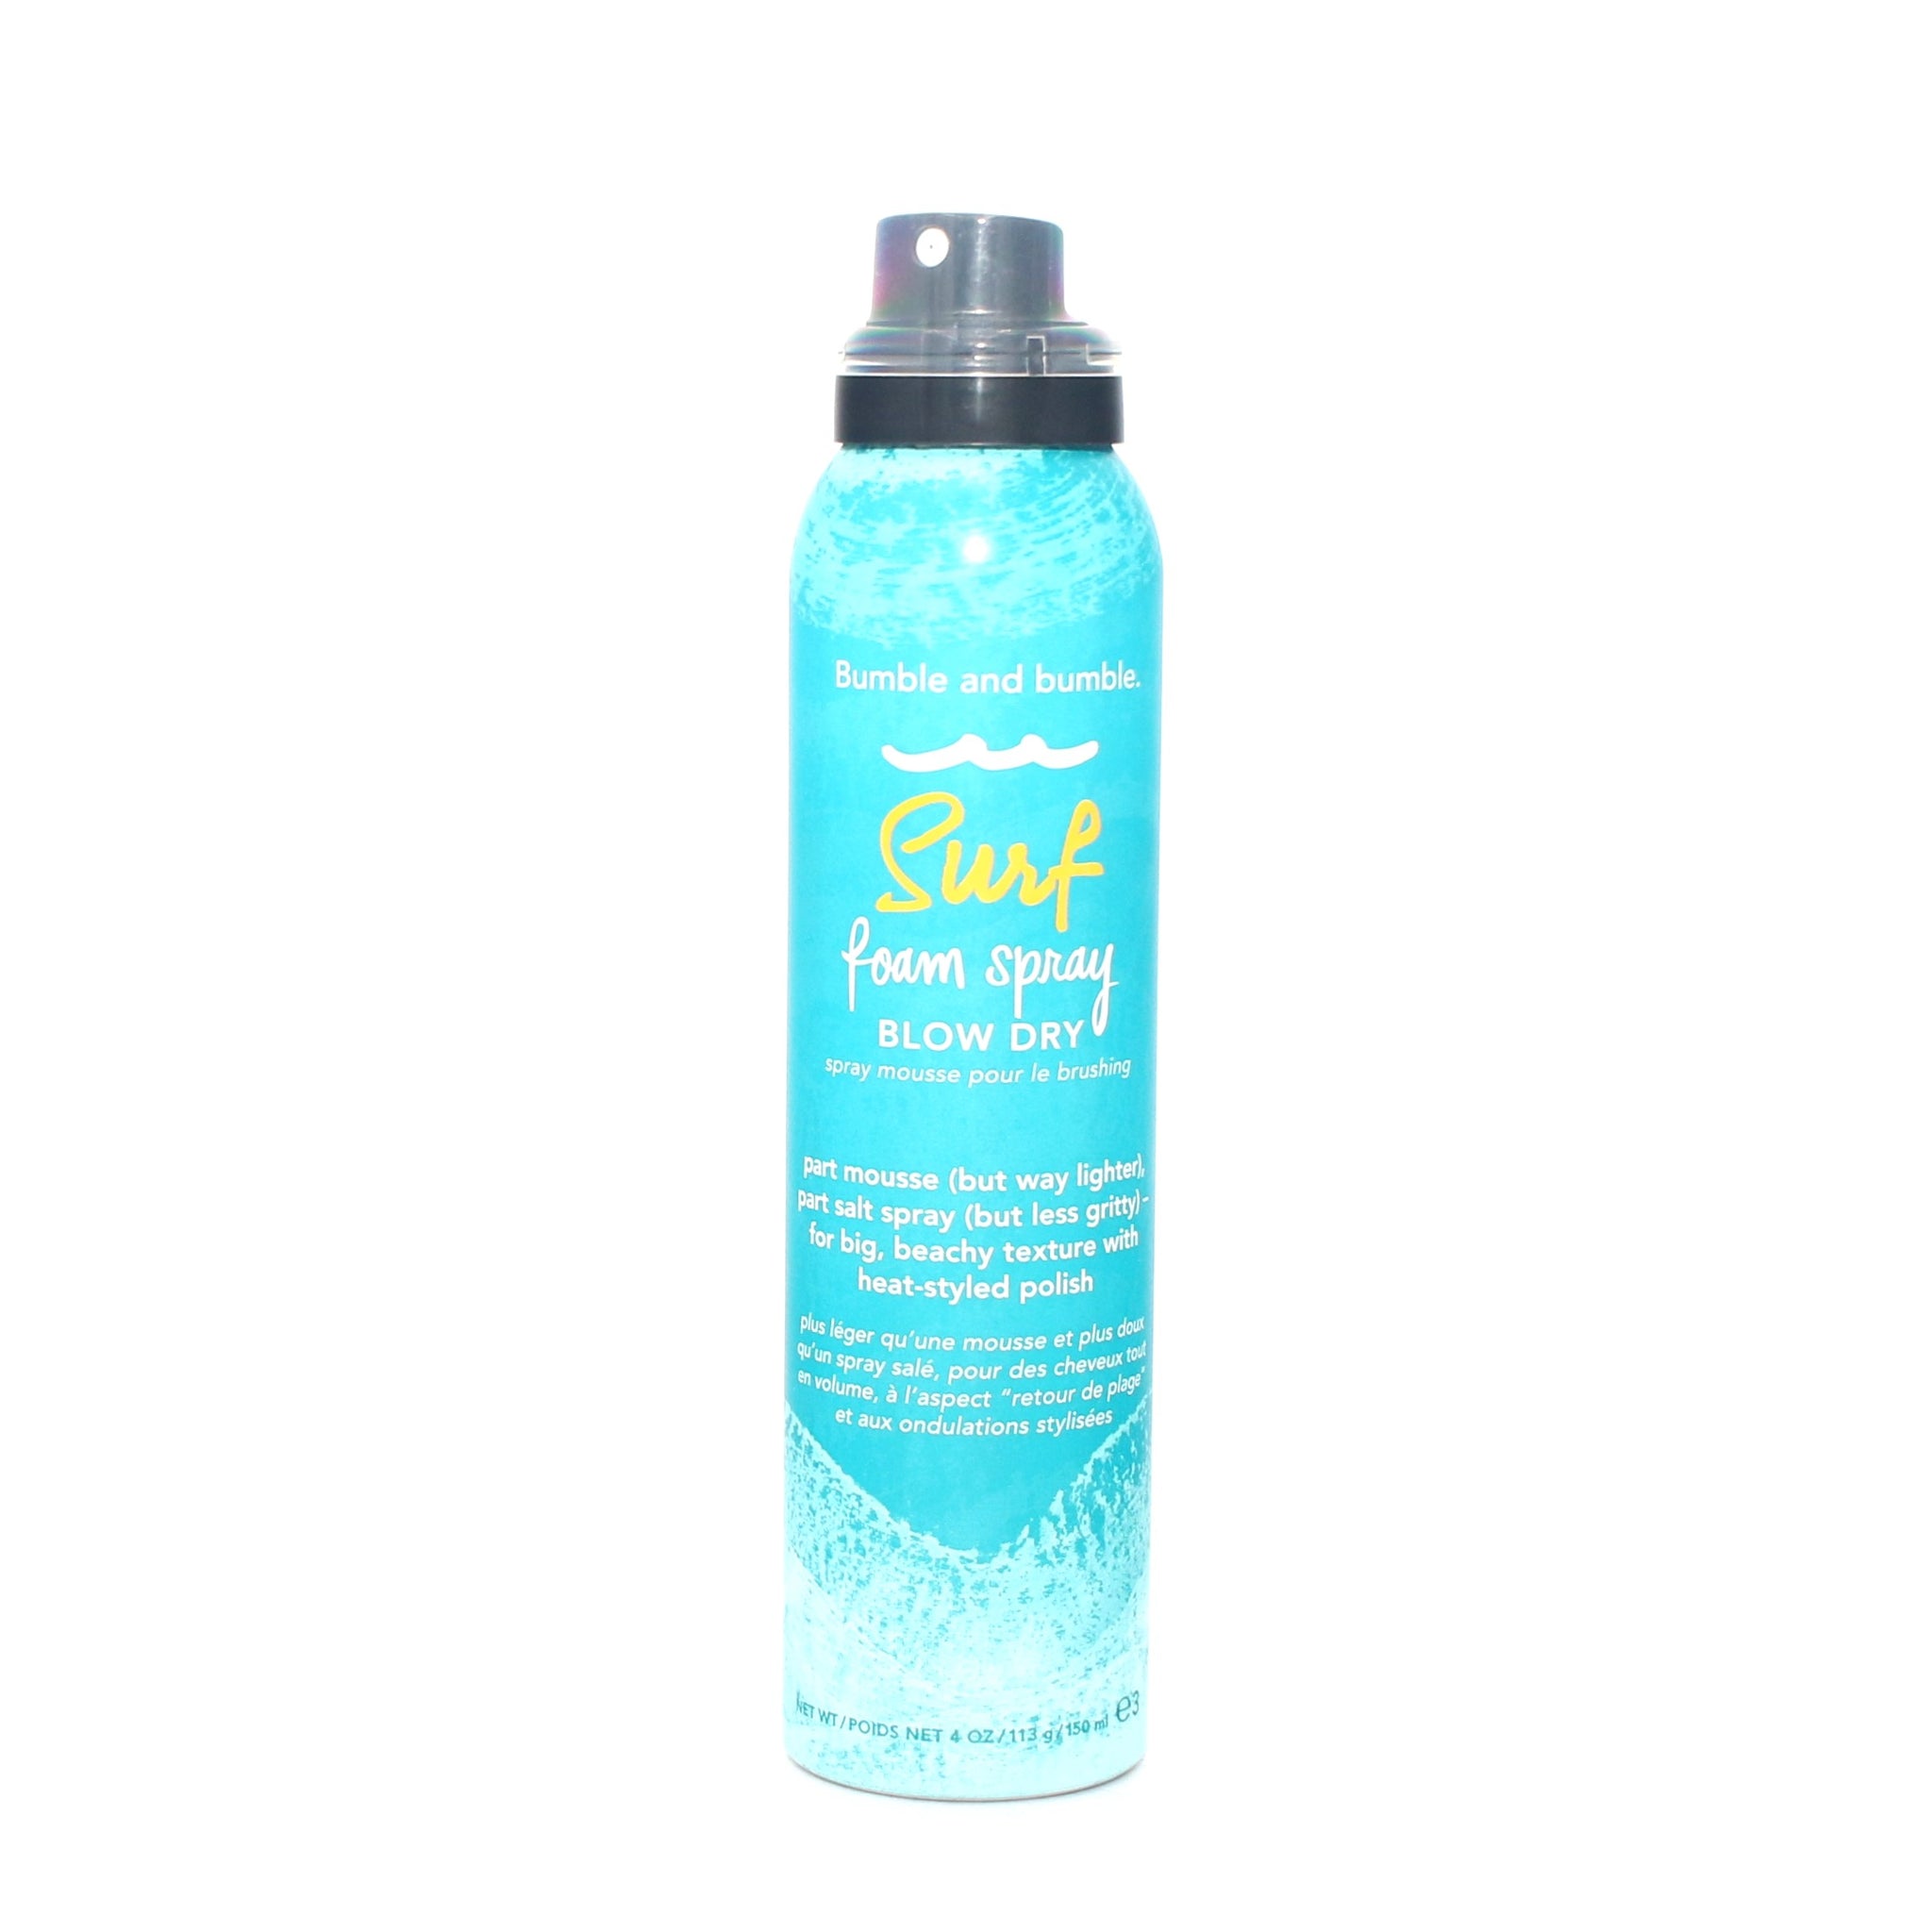 Bumble and Bumble Surf Foam Spray Blow Dry Spray Mousse 4 oz